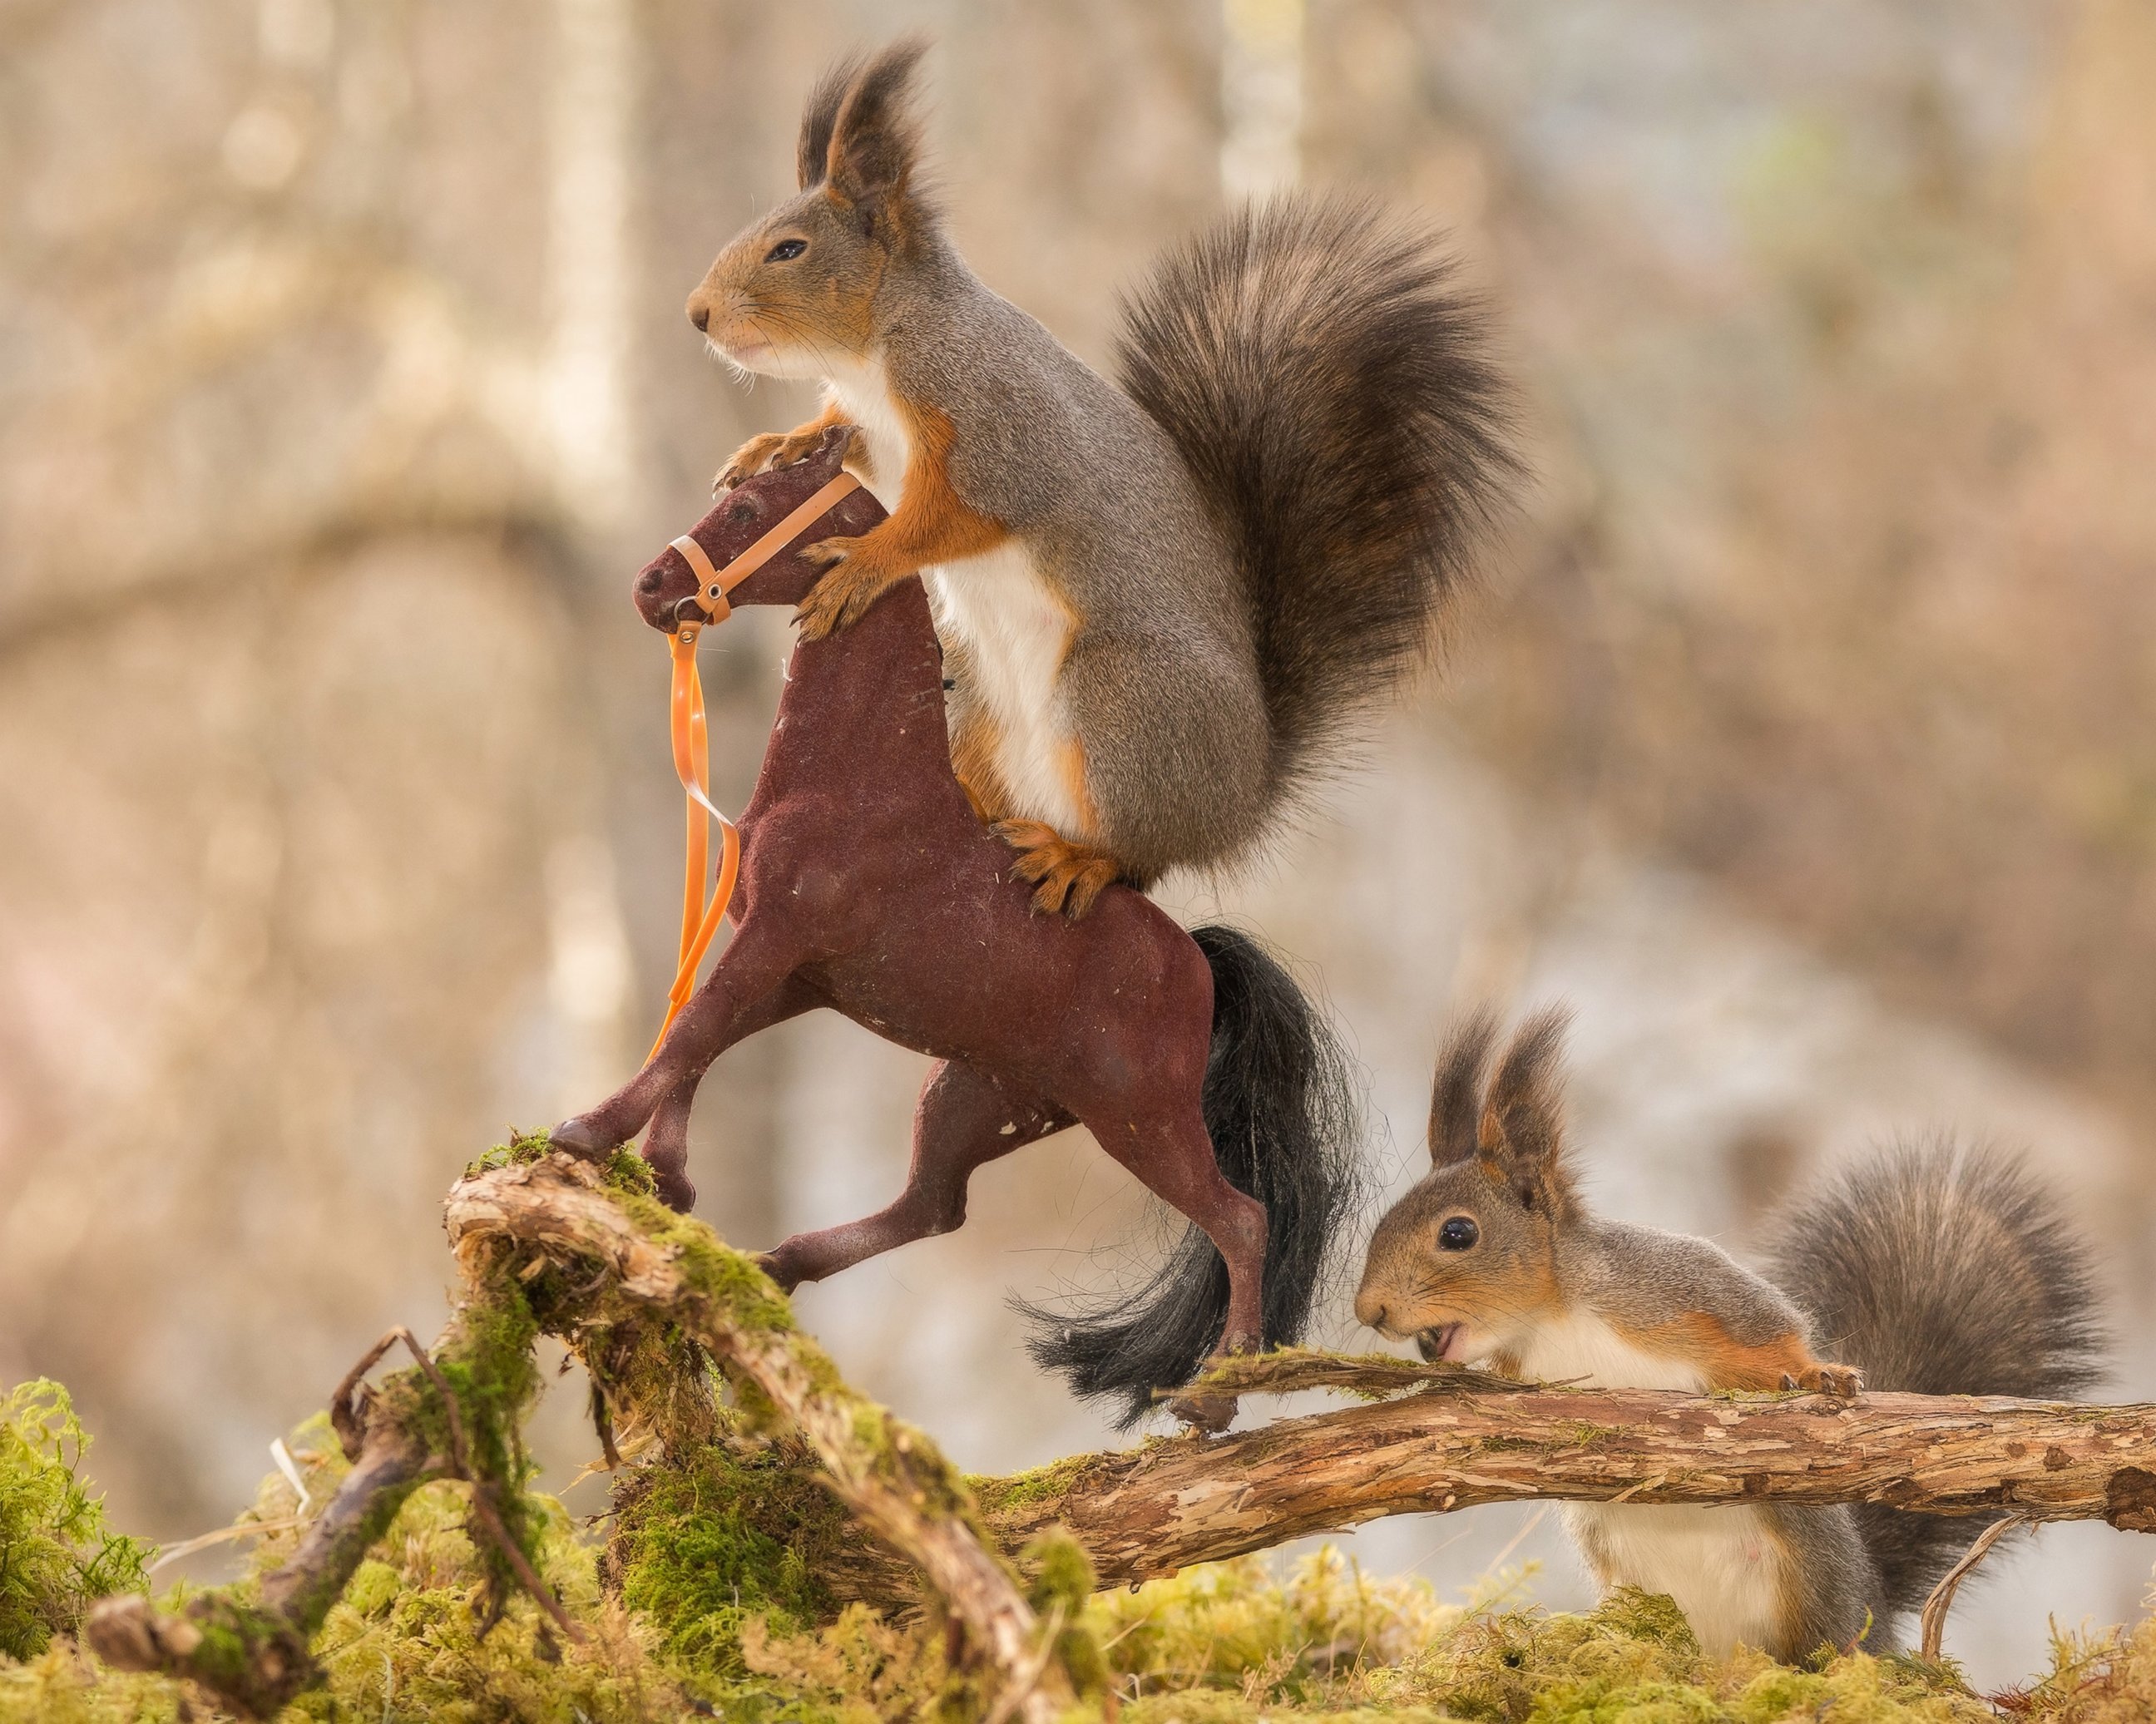 PHOTO: These squirrels were snapped posing on the toy horses by Geert Weggen, 48, a photographer and builder from Bispgarden, Sweden. 